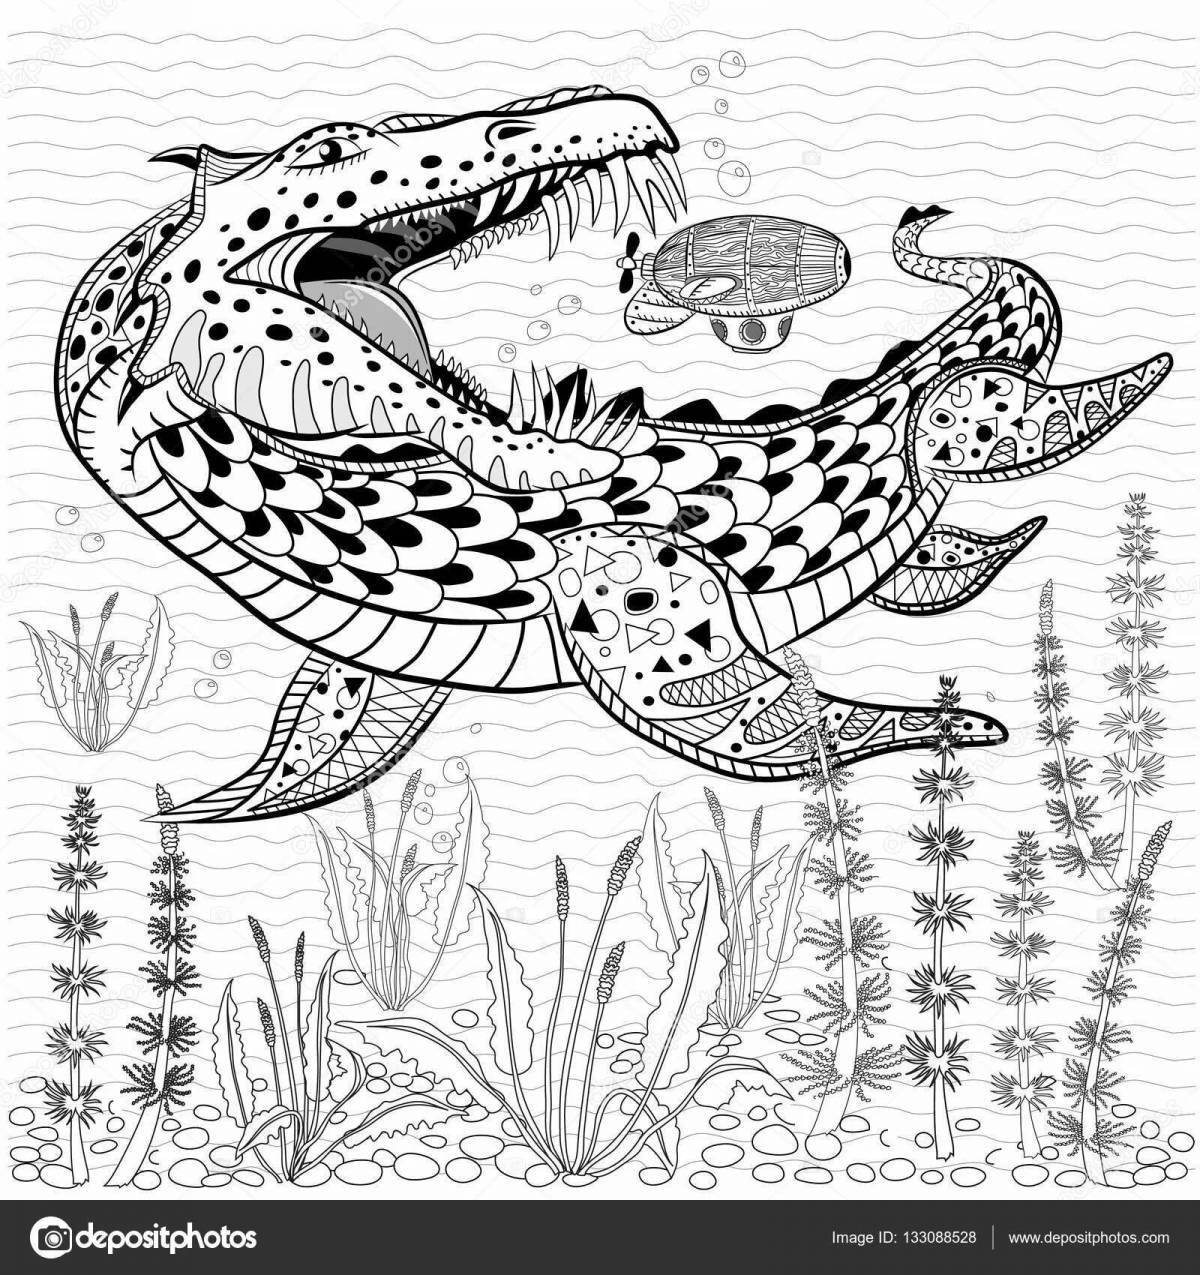 Mystical sea monster coloring page